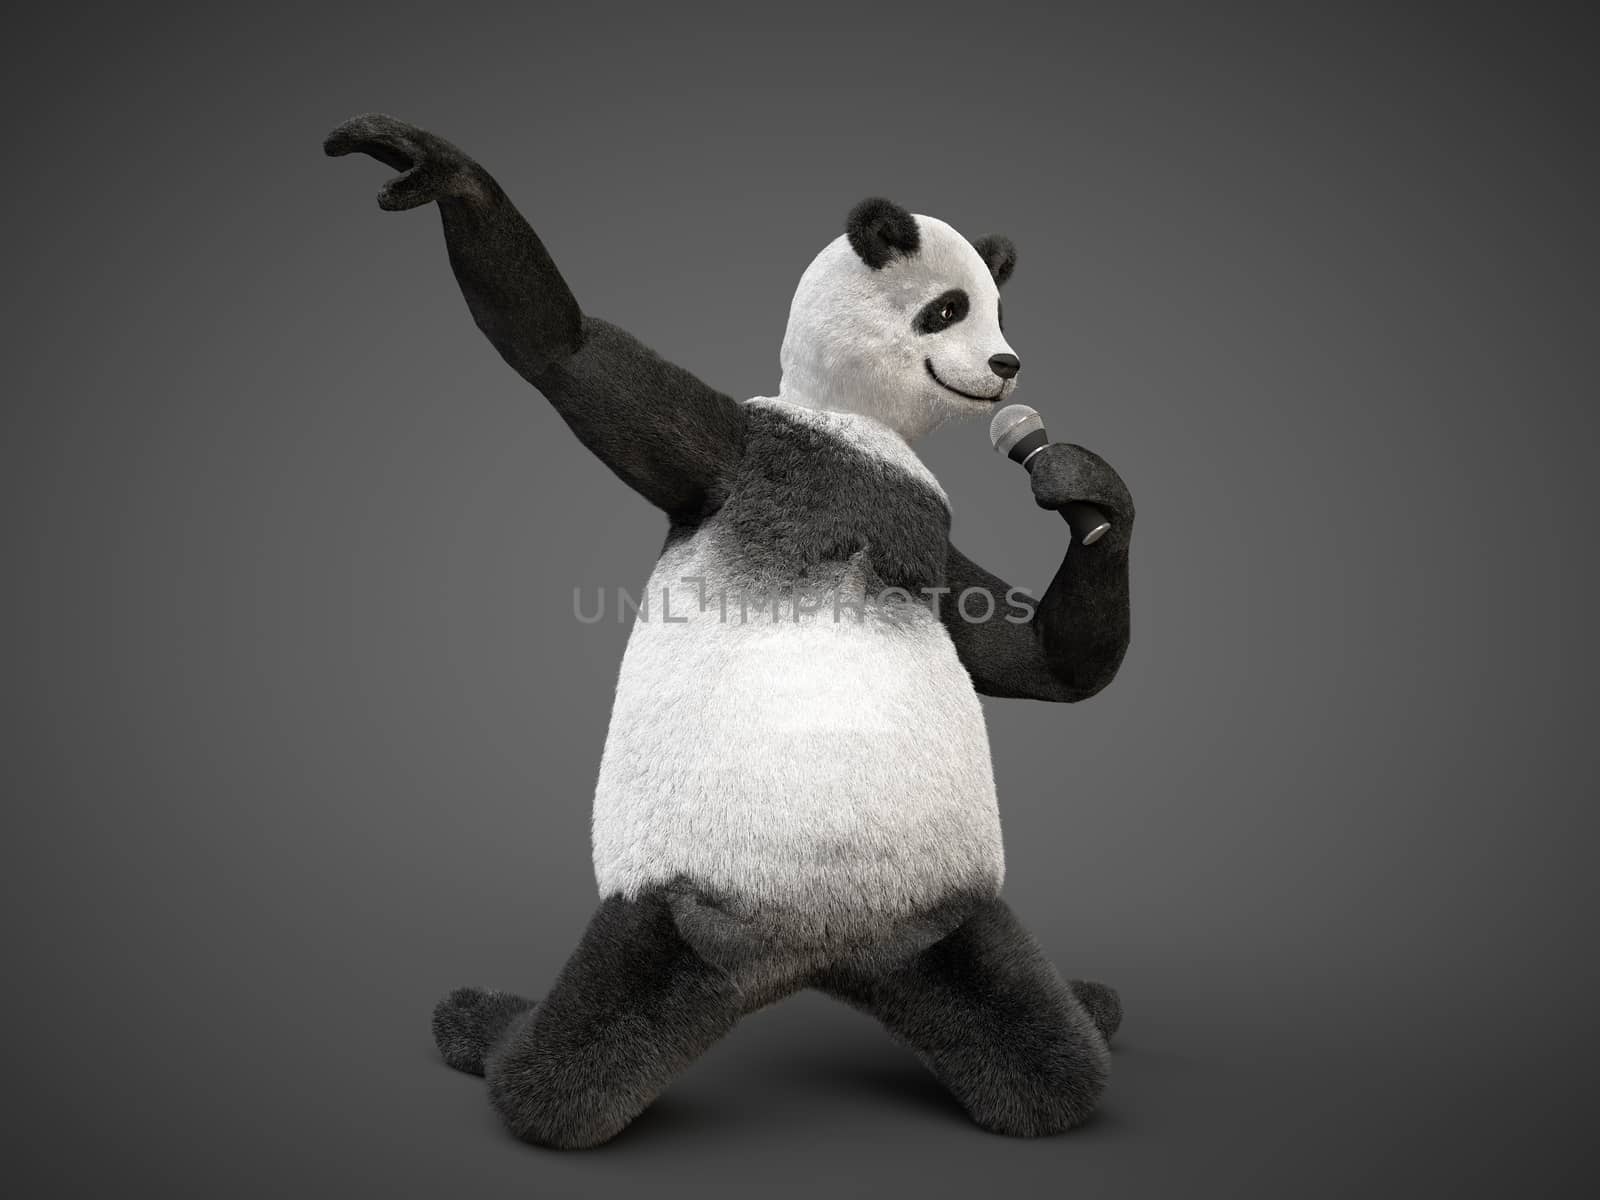 Personage character animal bear panda sing song microphone by xtate